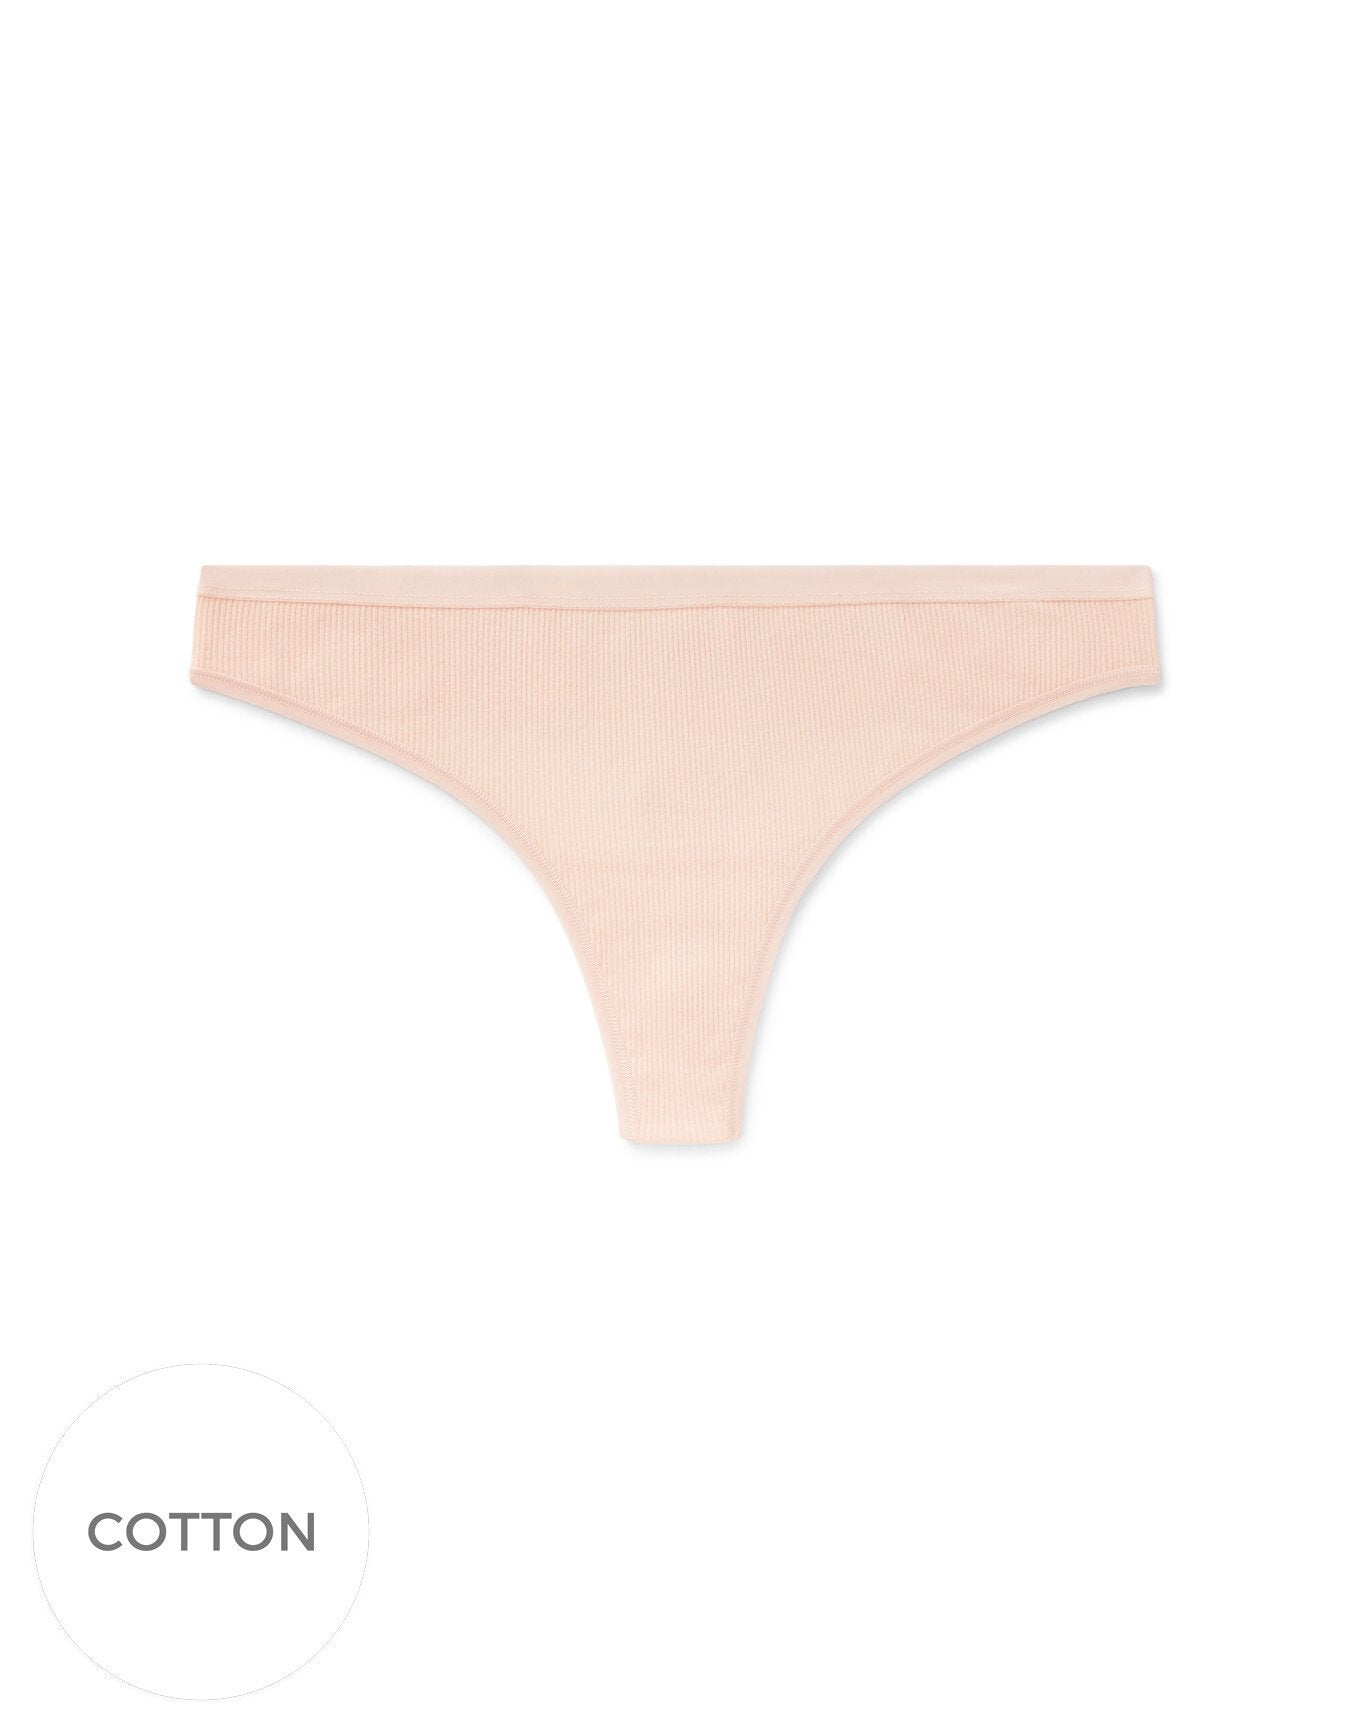 Adore Me Alexandra Ribbed Cotton Thong in color PchNctar 74S3 and shape thong